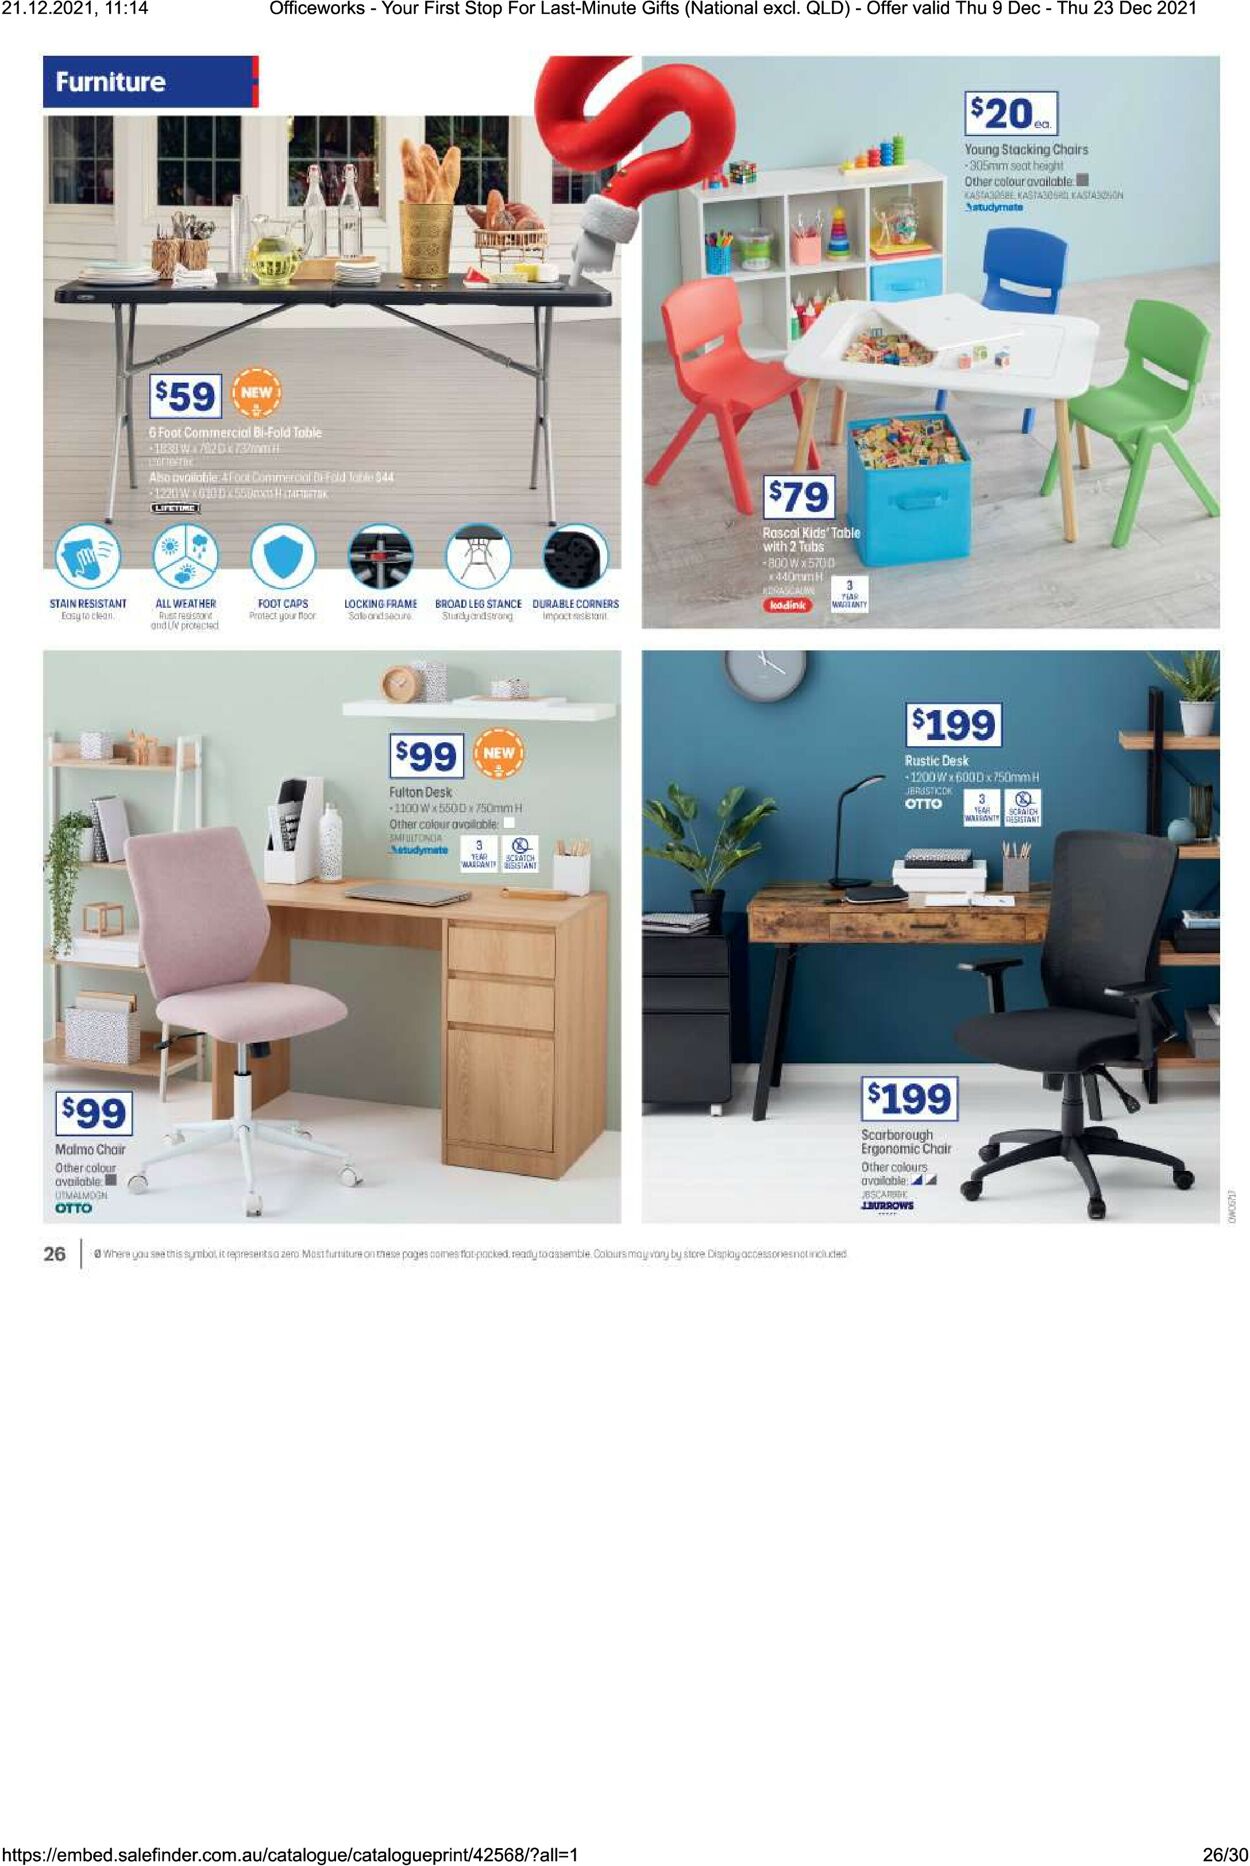 Catalogue Officeworks 09.12.2021 - 24.12.2021